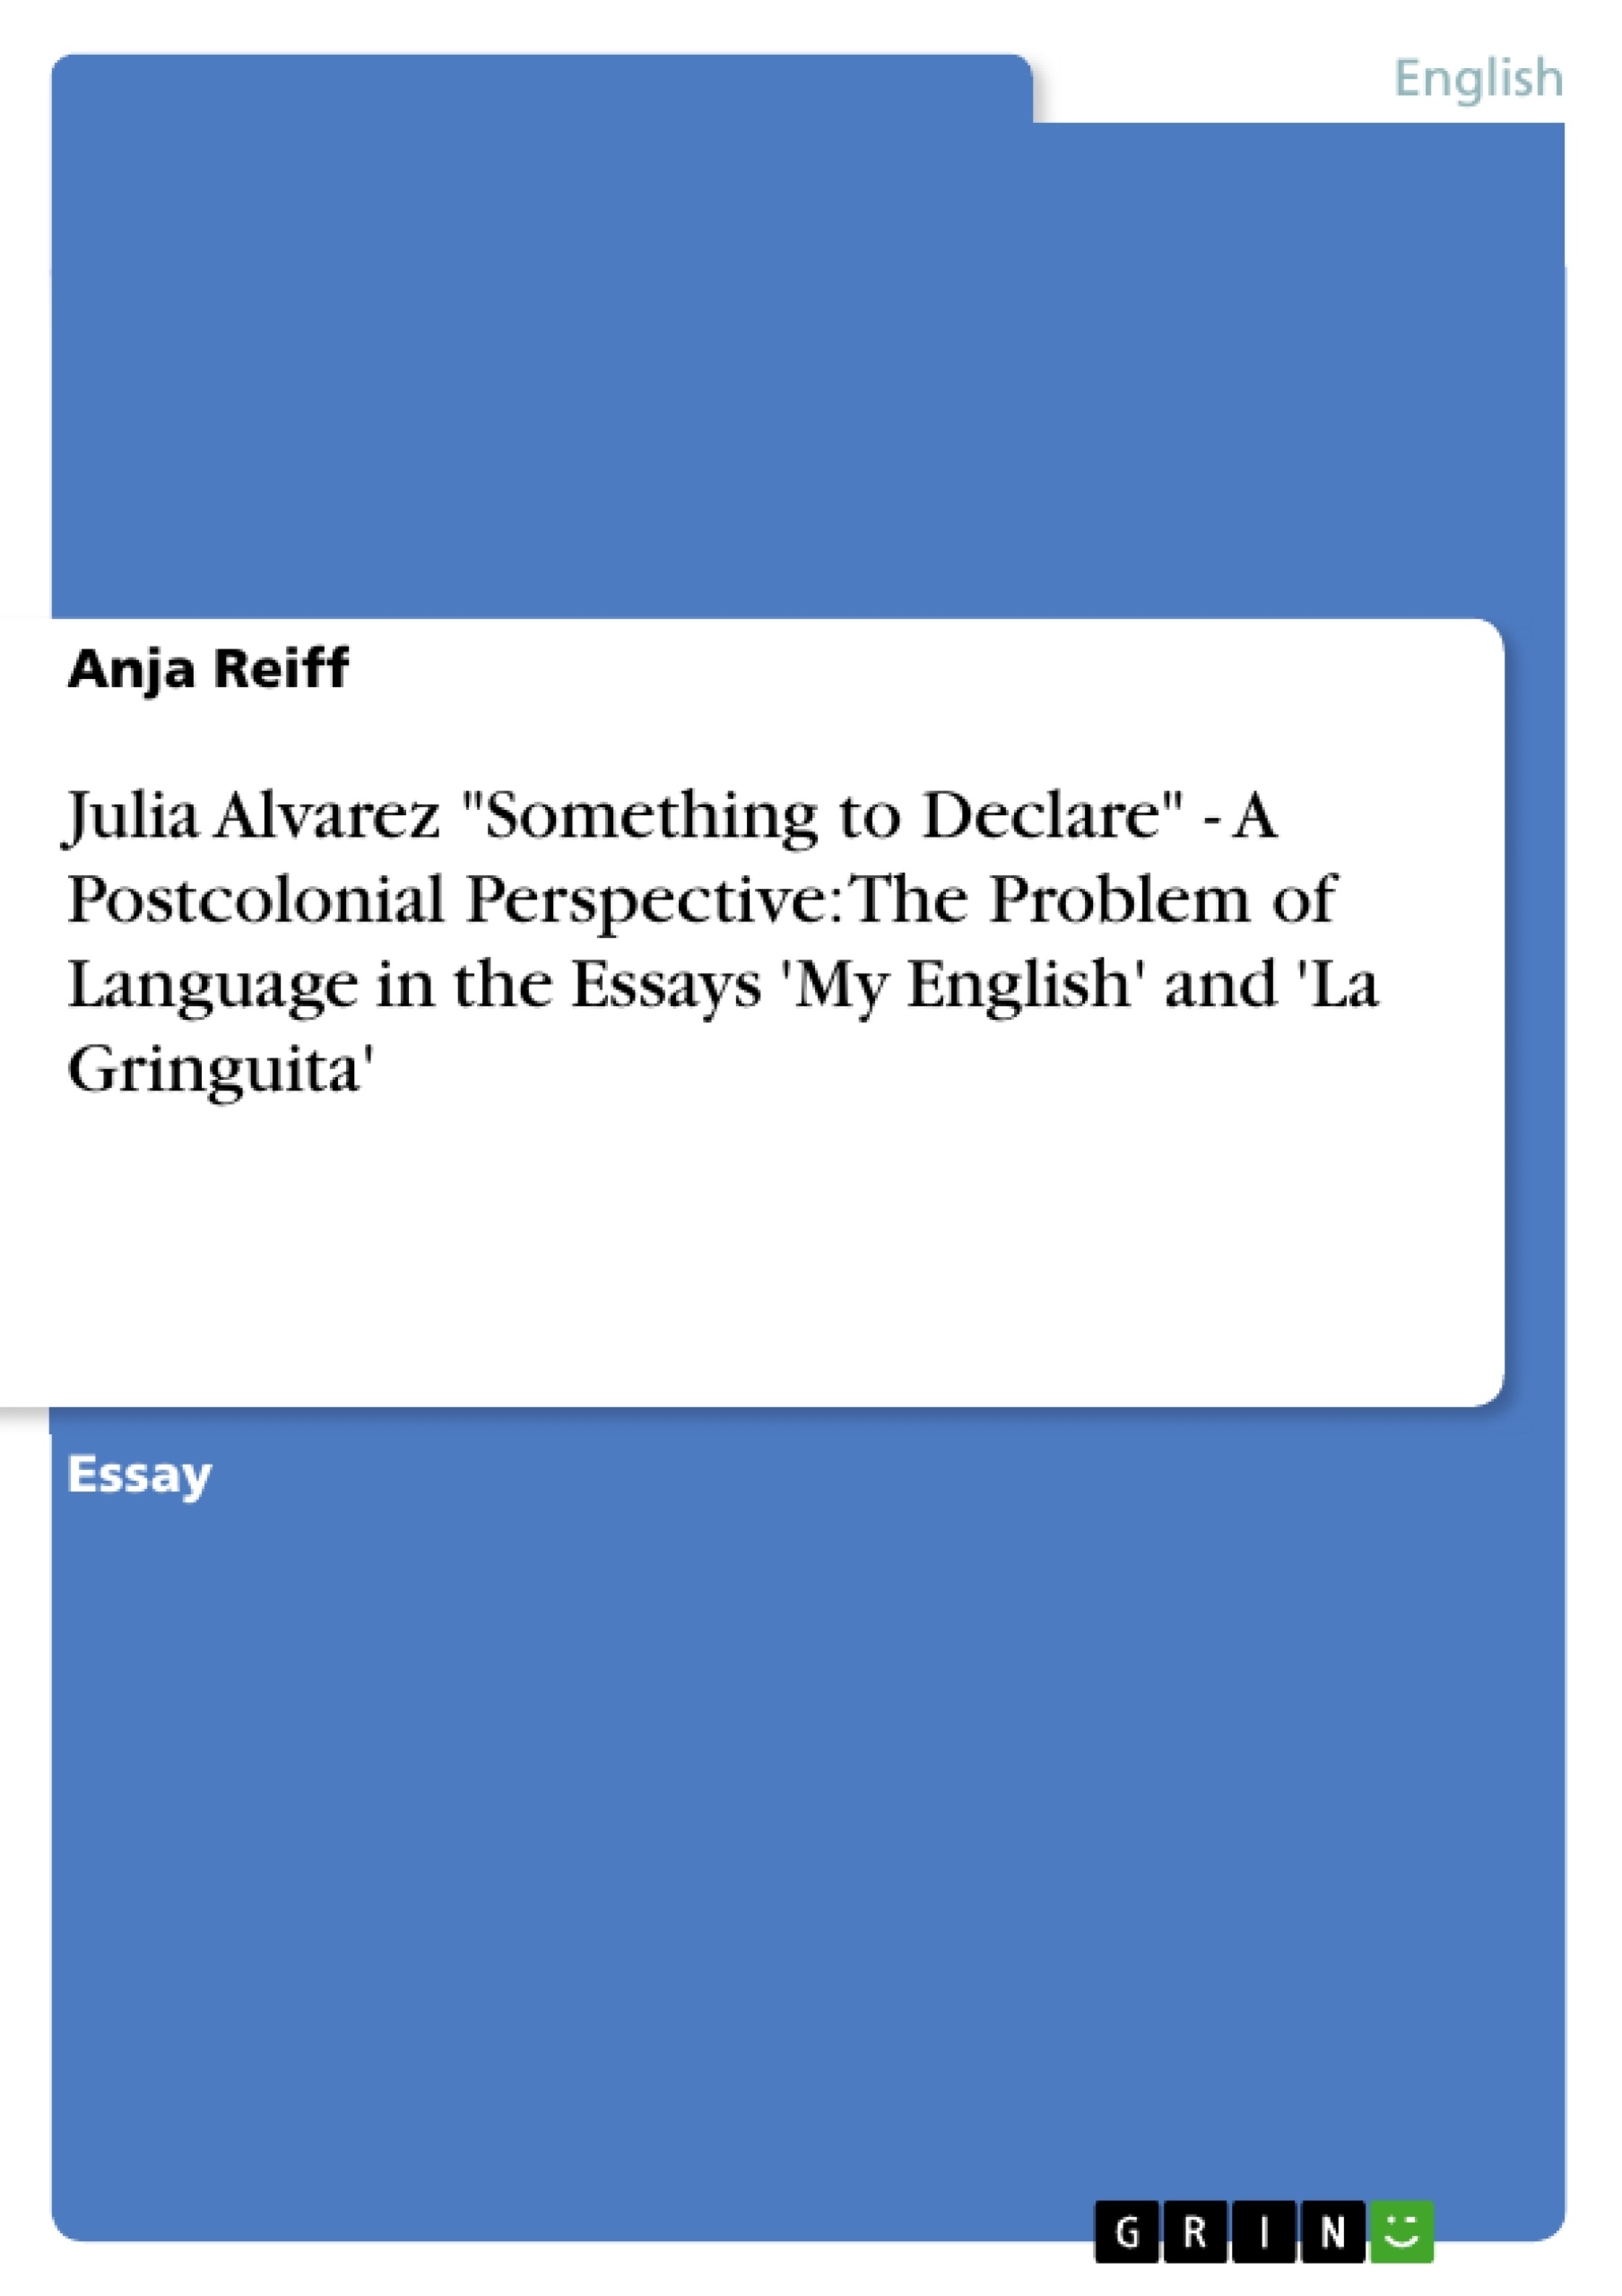 Título: Julia Alvarez "Something to Declare" - A Postcolonial Perspective: The Problem of Language in the Essays 'My English' and 'La Gringuita'